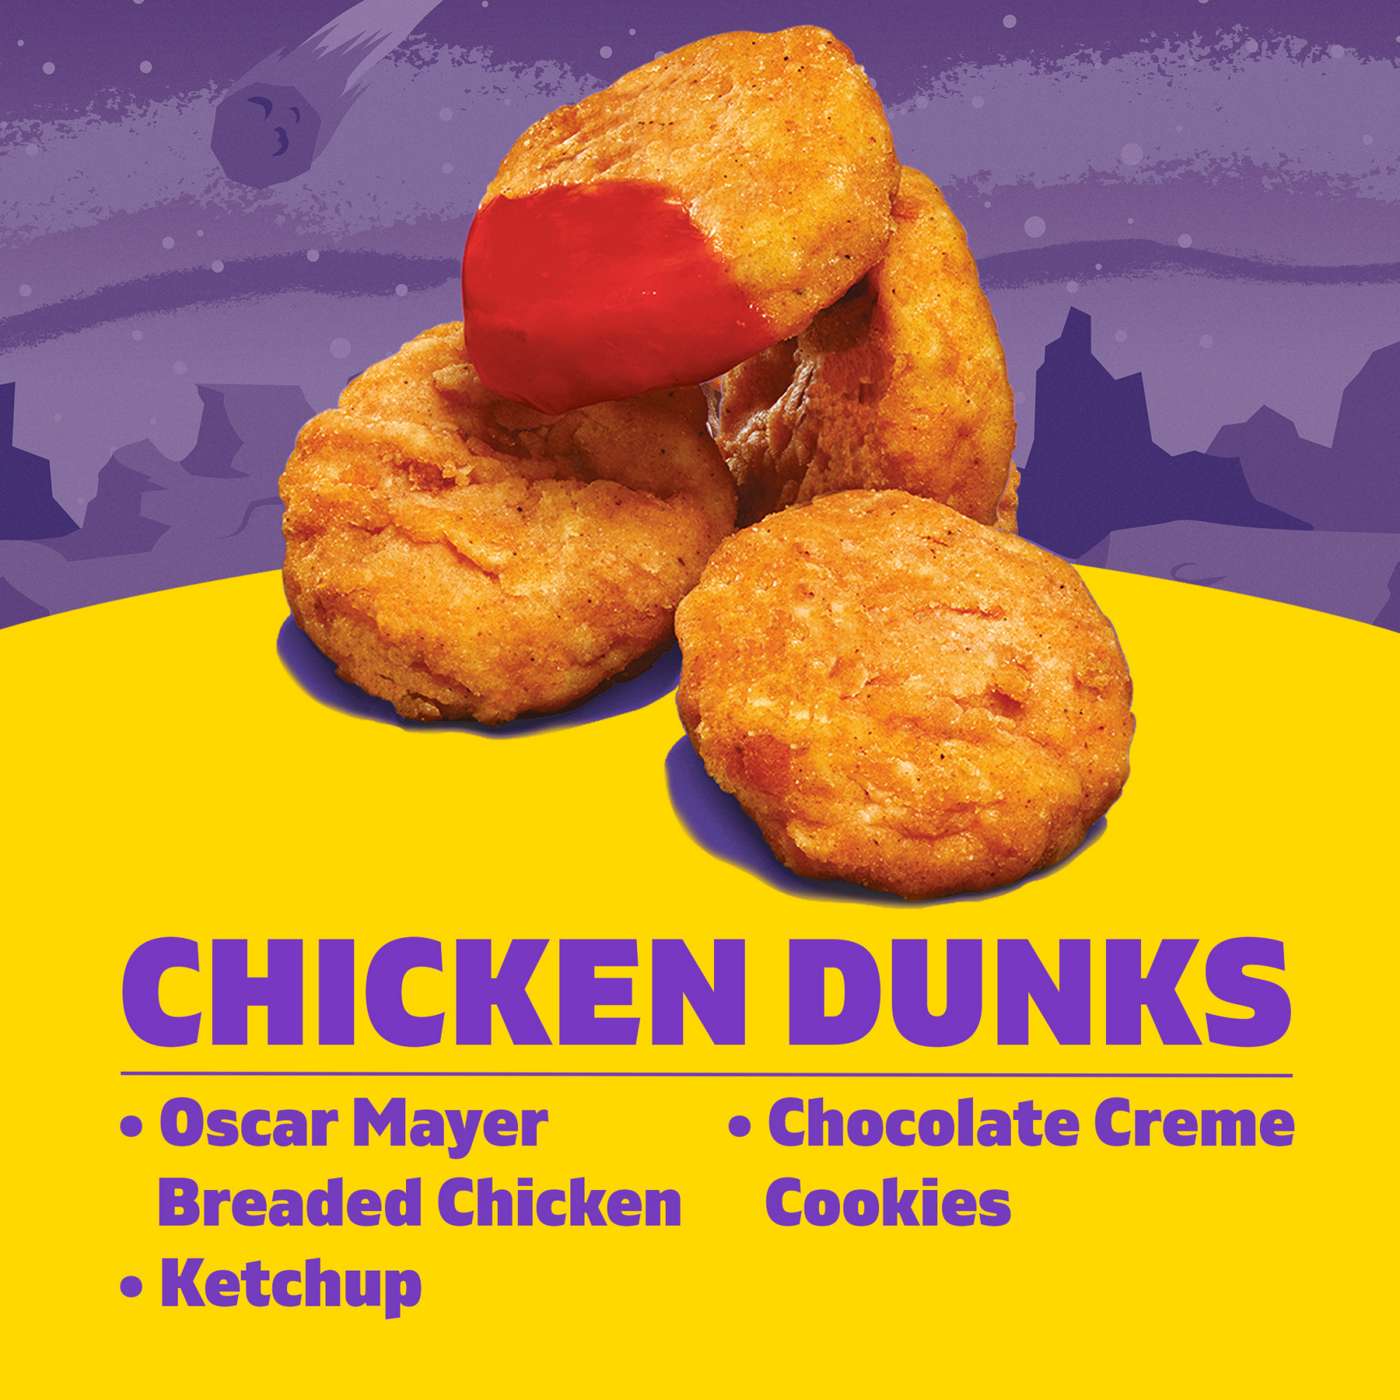 Lunchables Snack Kit Tray - Chicken Dunks with Chocolate Creme Cookies; image 6 of 6